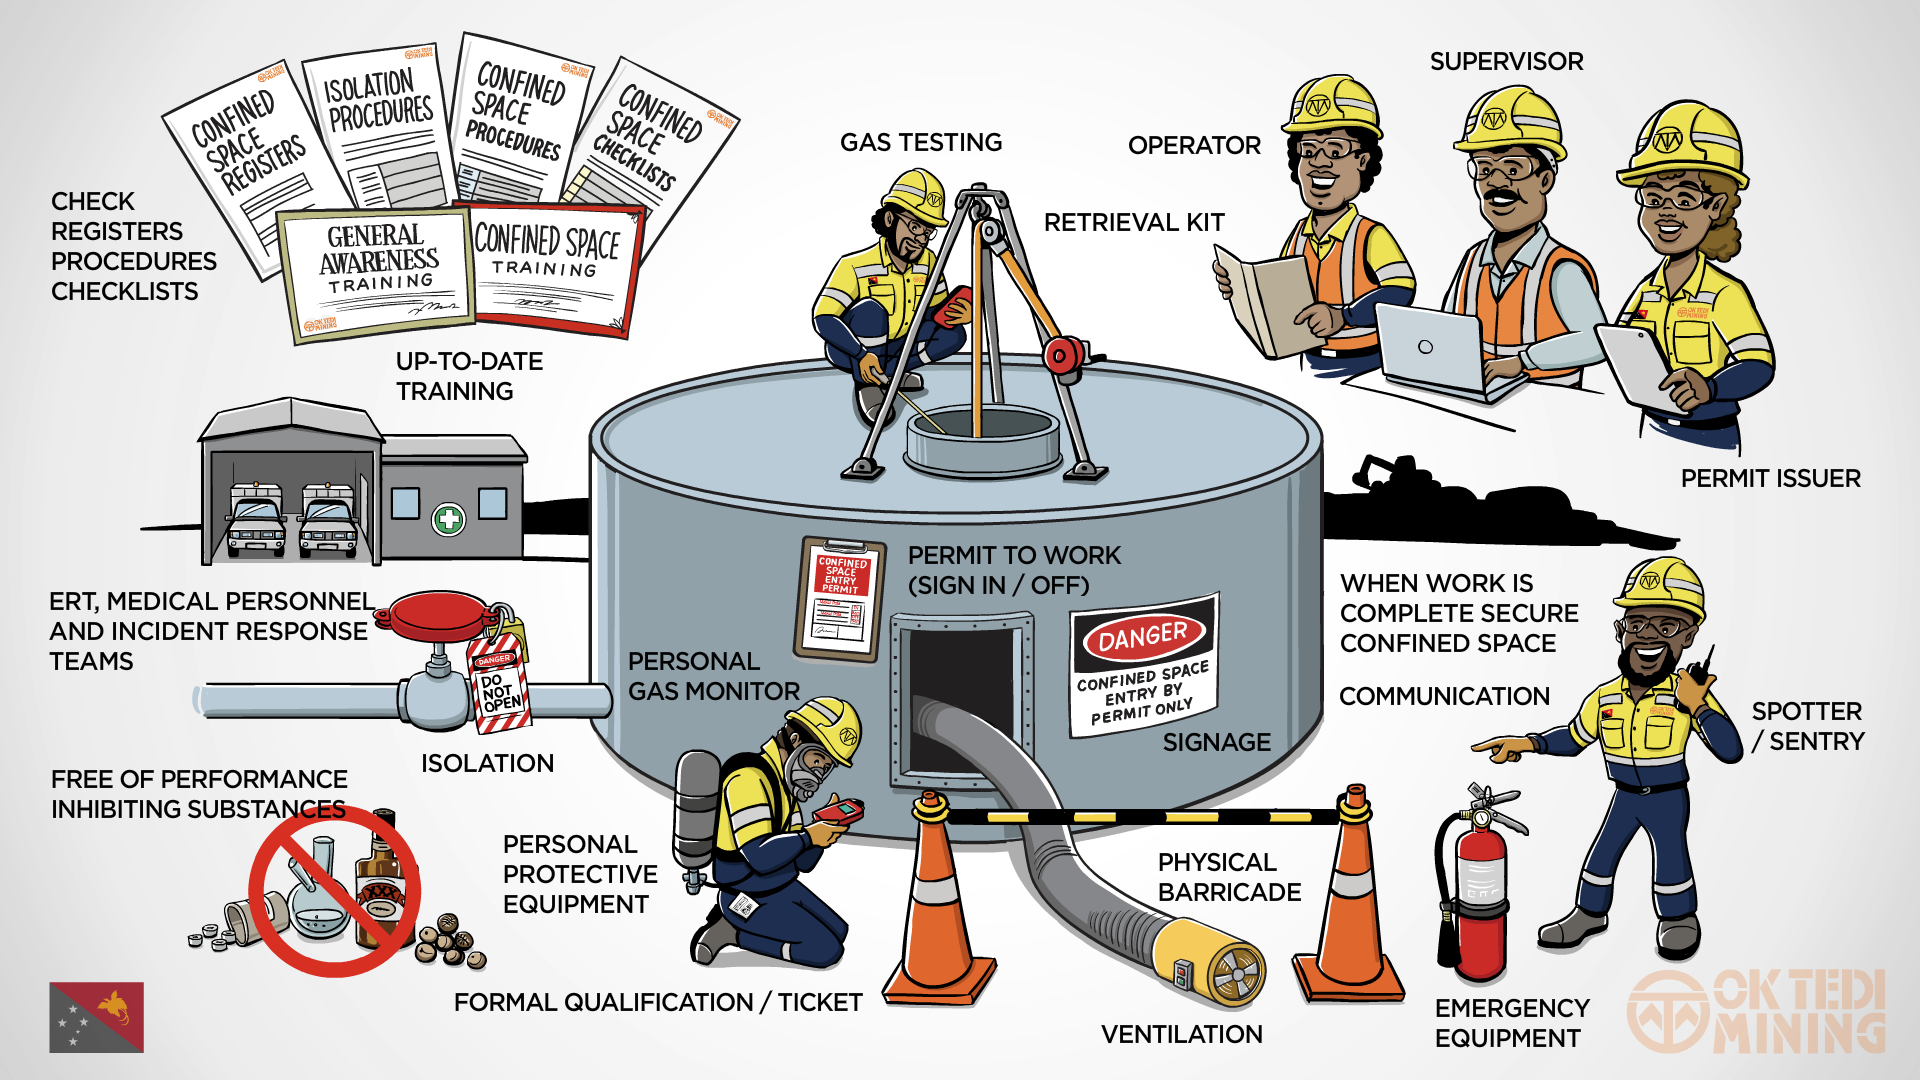 Safety Poster Confined Space Entry Cs999425 - vrogue.co